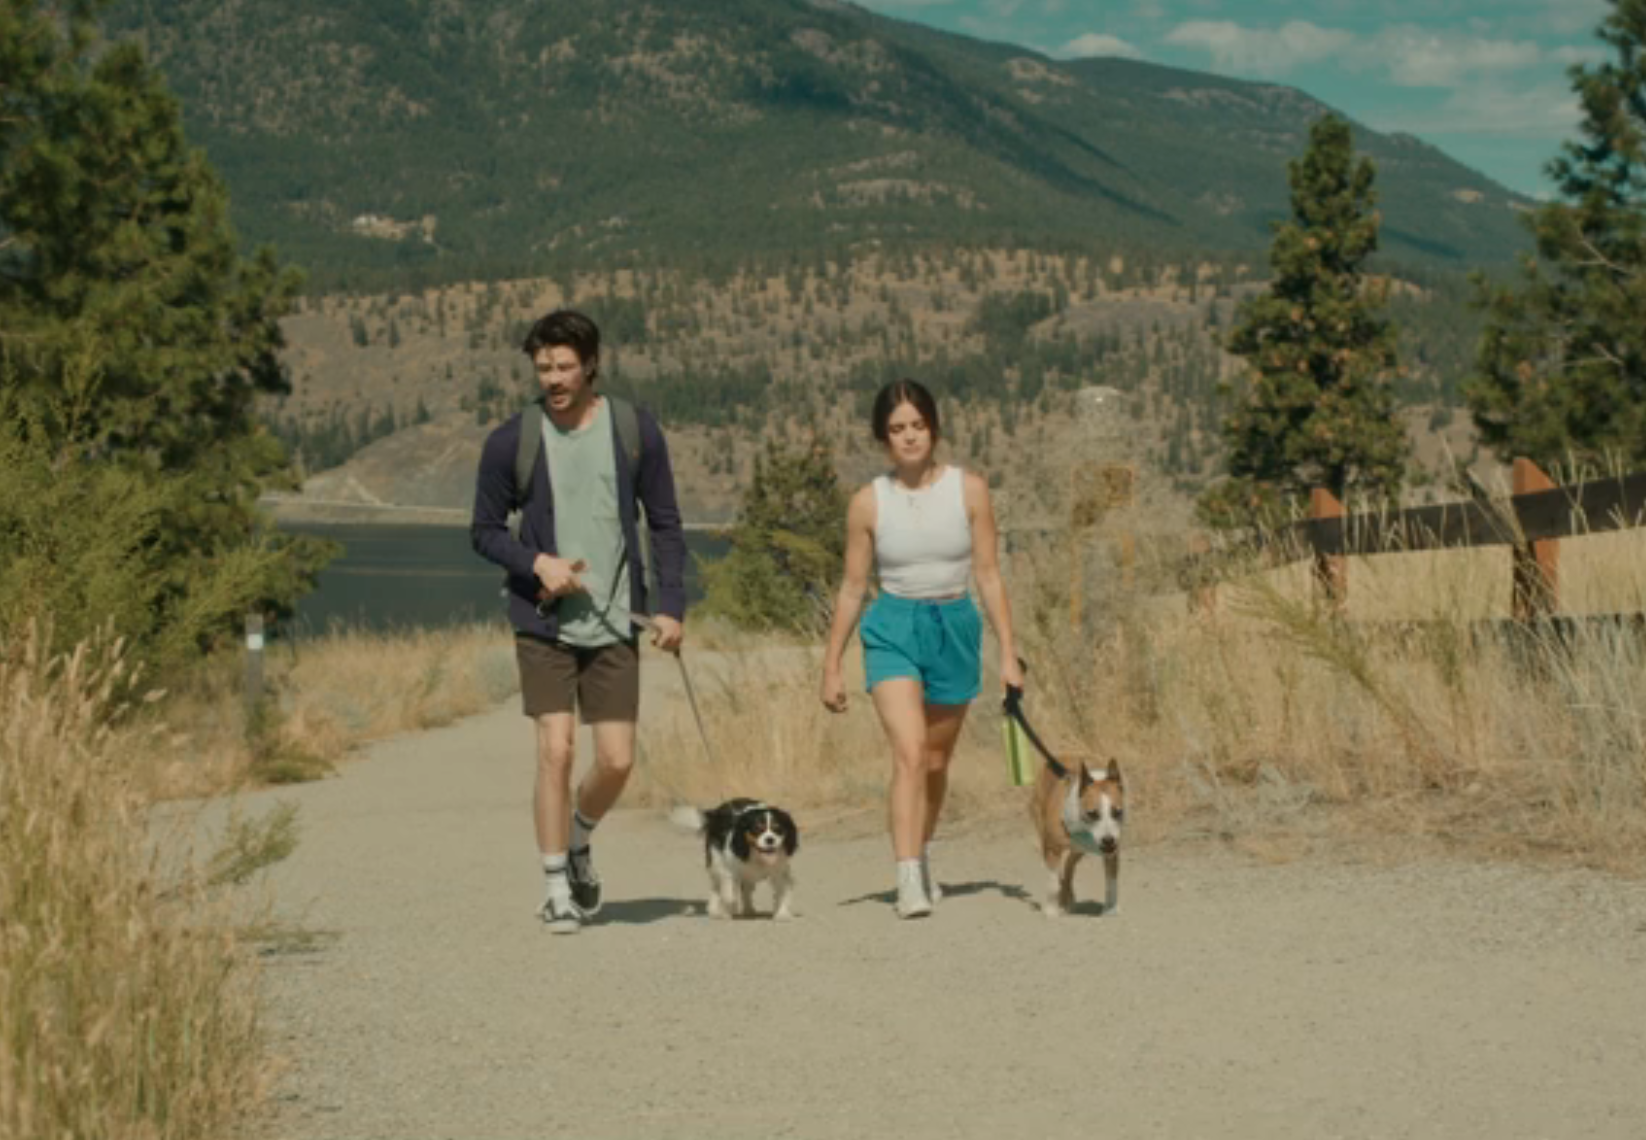 grant gustin and lucy hale taking dogs for a hike